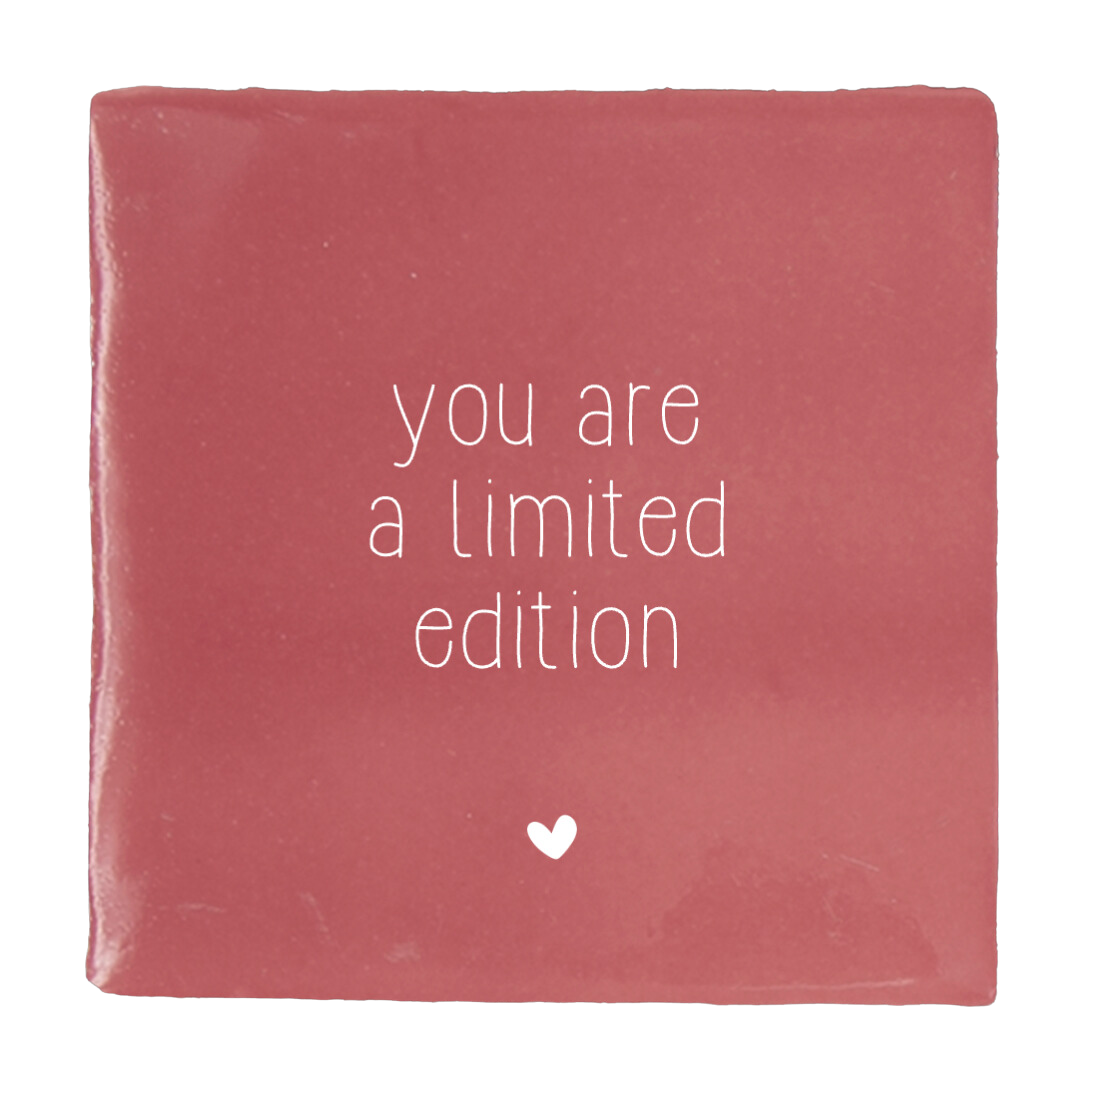 Label2X Tegeltje you are a limited edition woonaccessoires homedecoratie